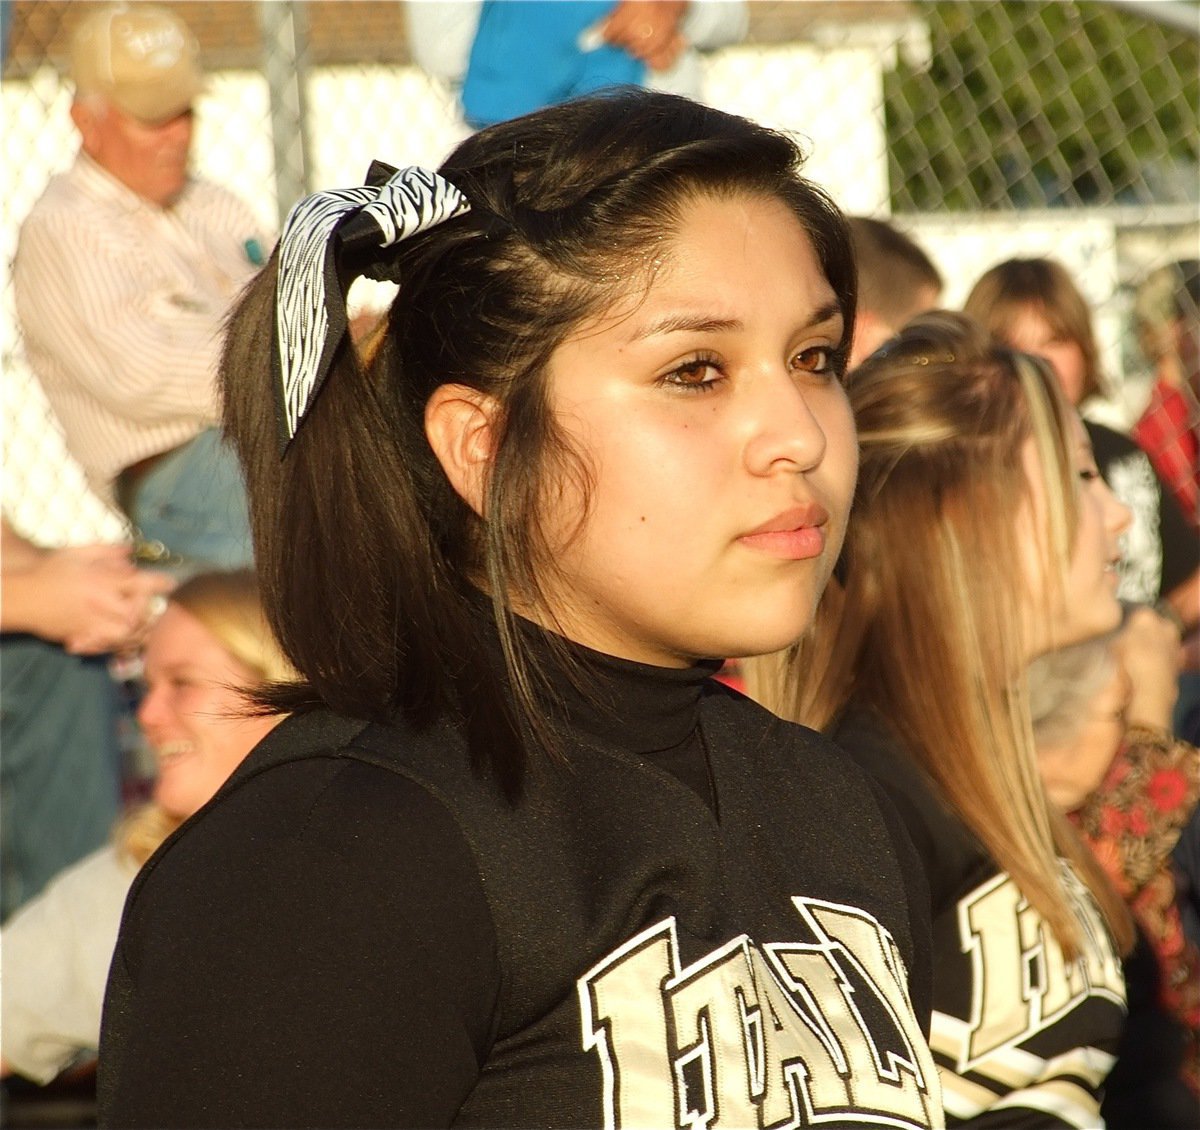 Image: Watching the action — Monserrat Figueroa watches the game.